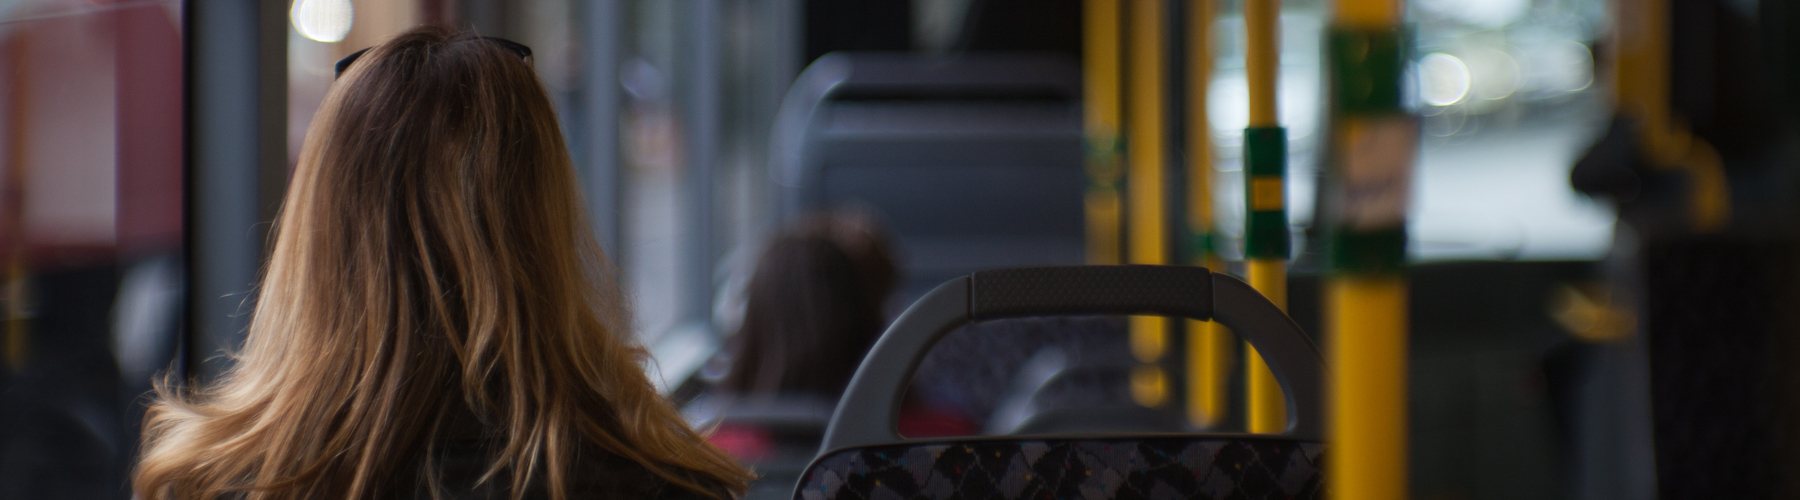 girl sitting on a bus listening to headphones